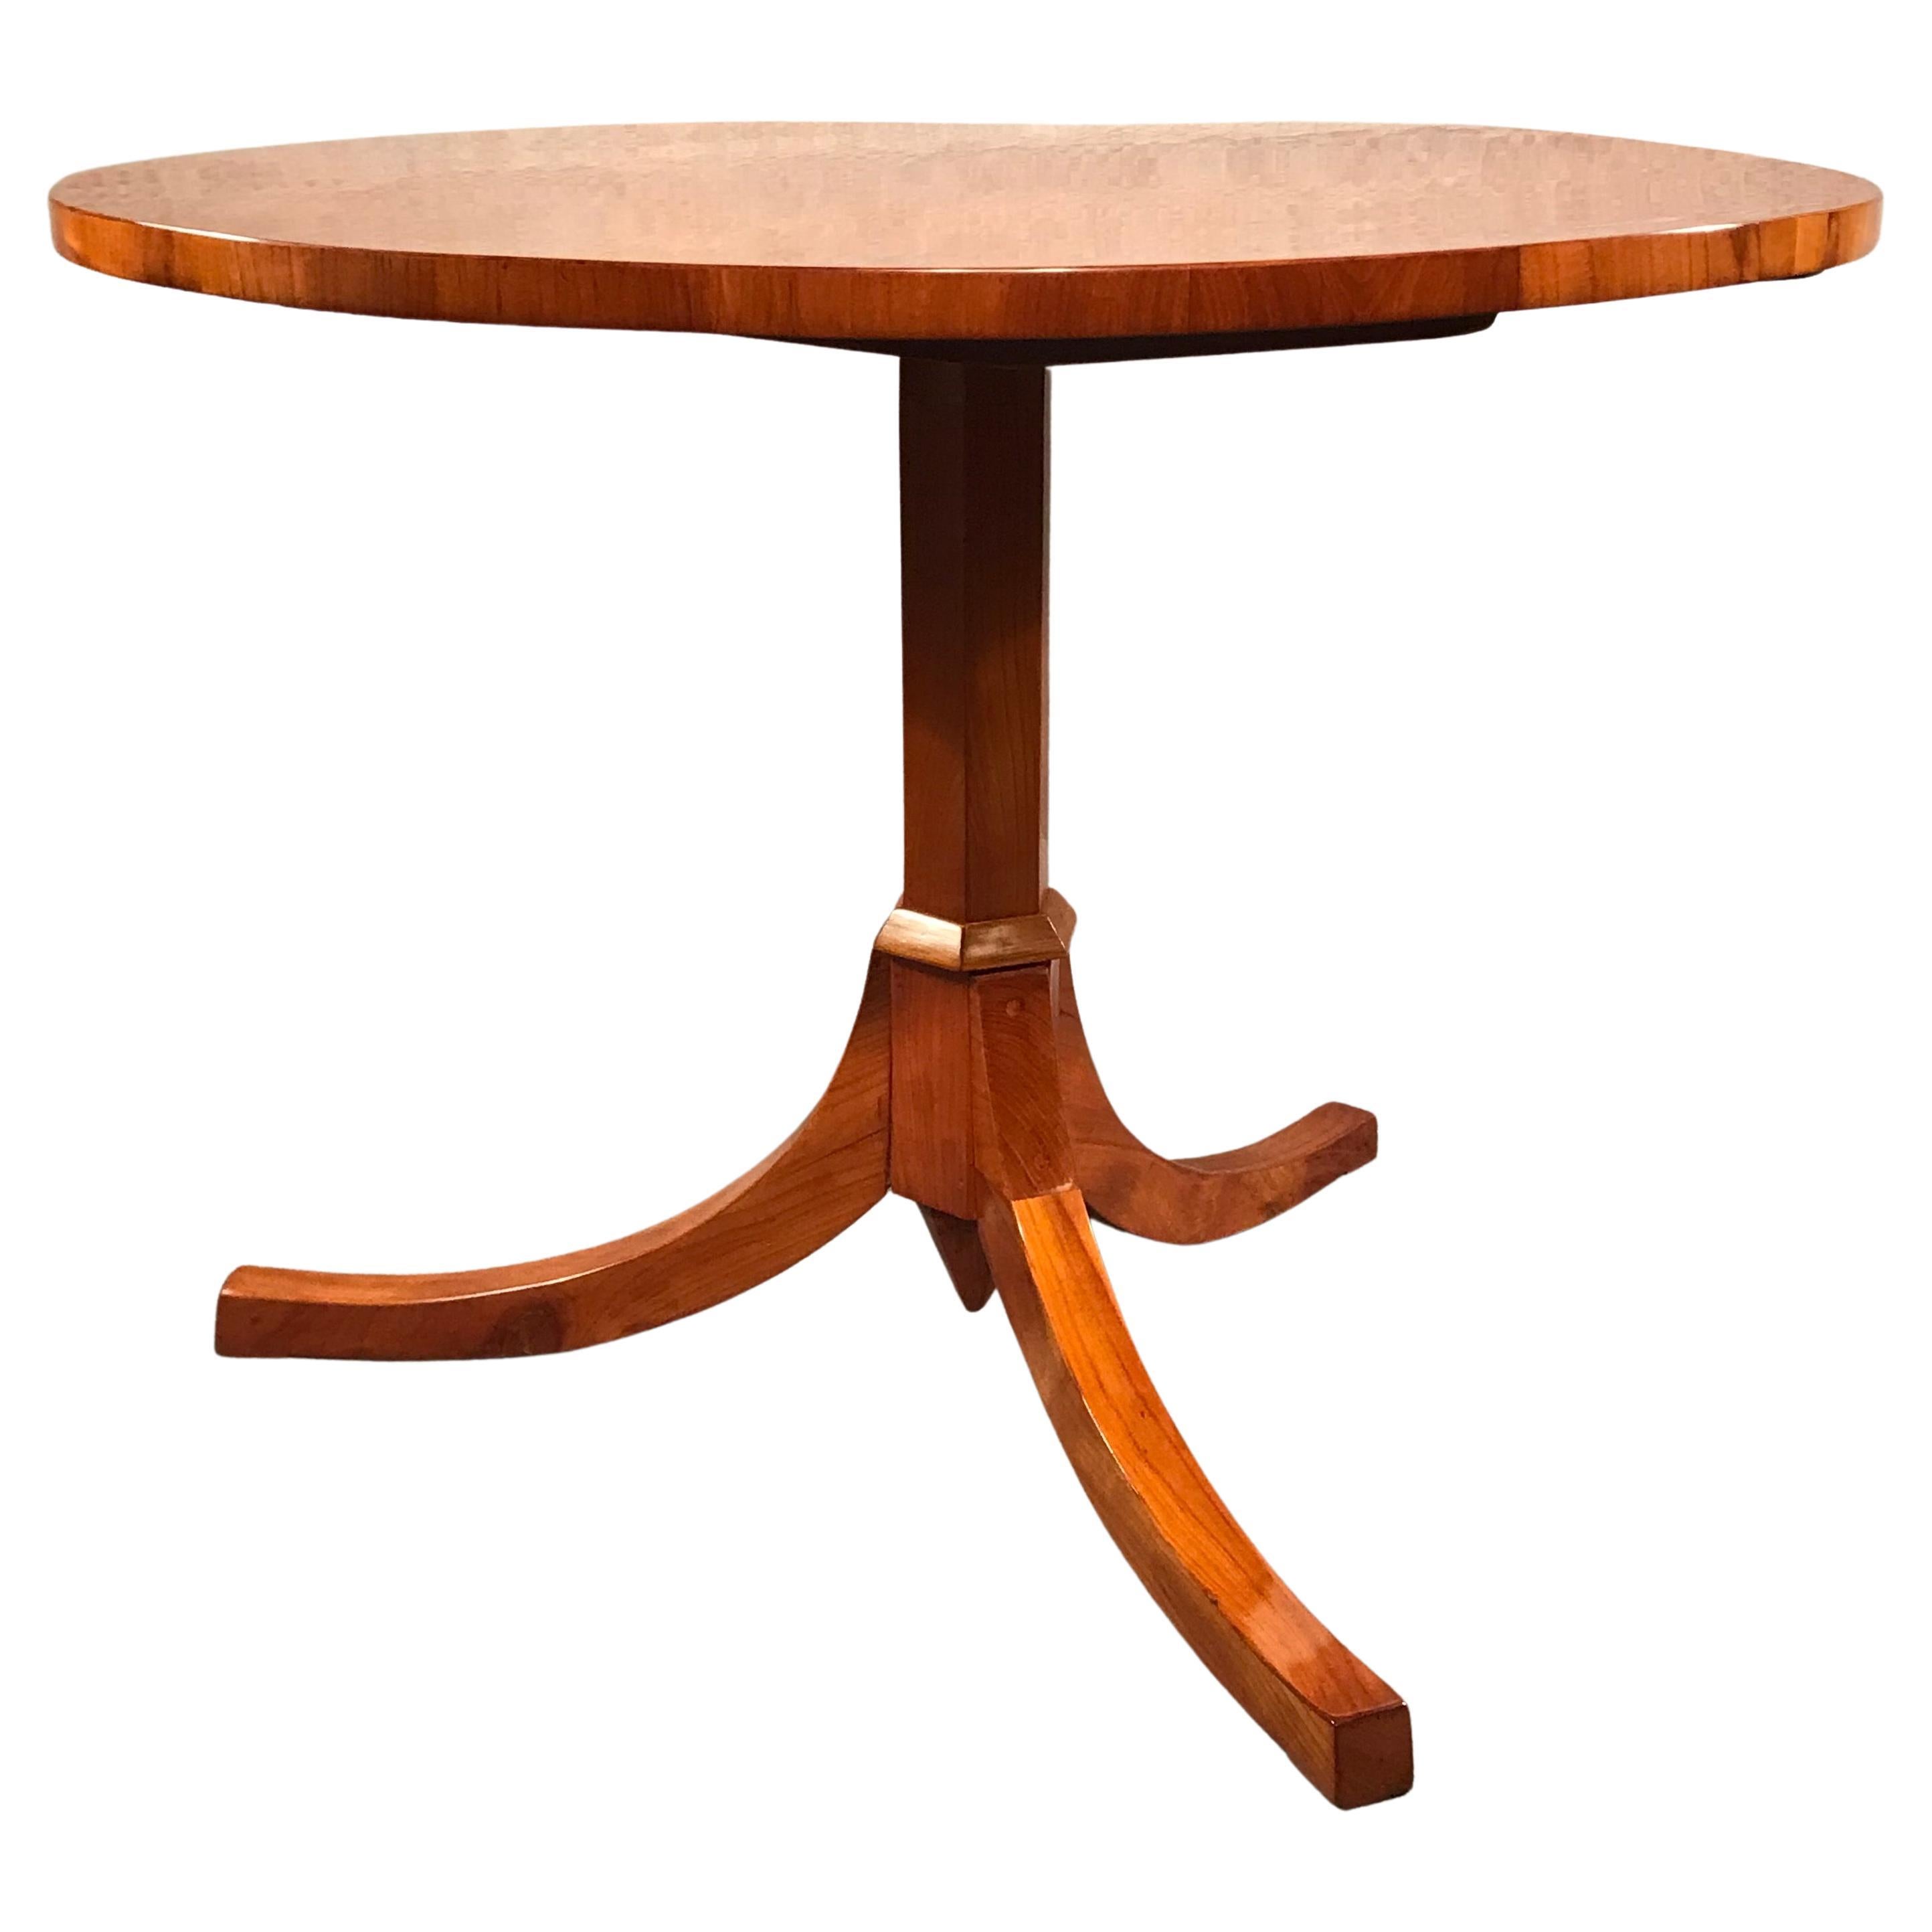 This original Biedermeier table dates back to around 1820-30 and comes from southern Germany. The table stands on a hexagonal column which rest on a trefoil base. The antique Biedermeier table has a pretty European cherry veneer on top and base. It